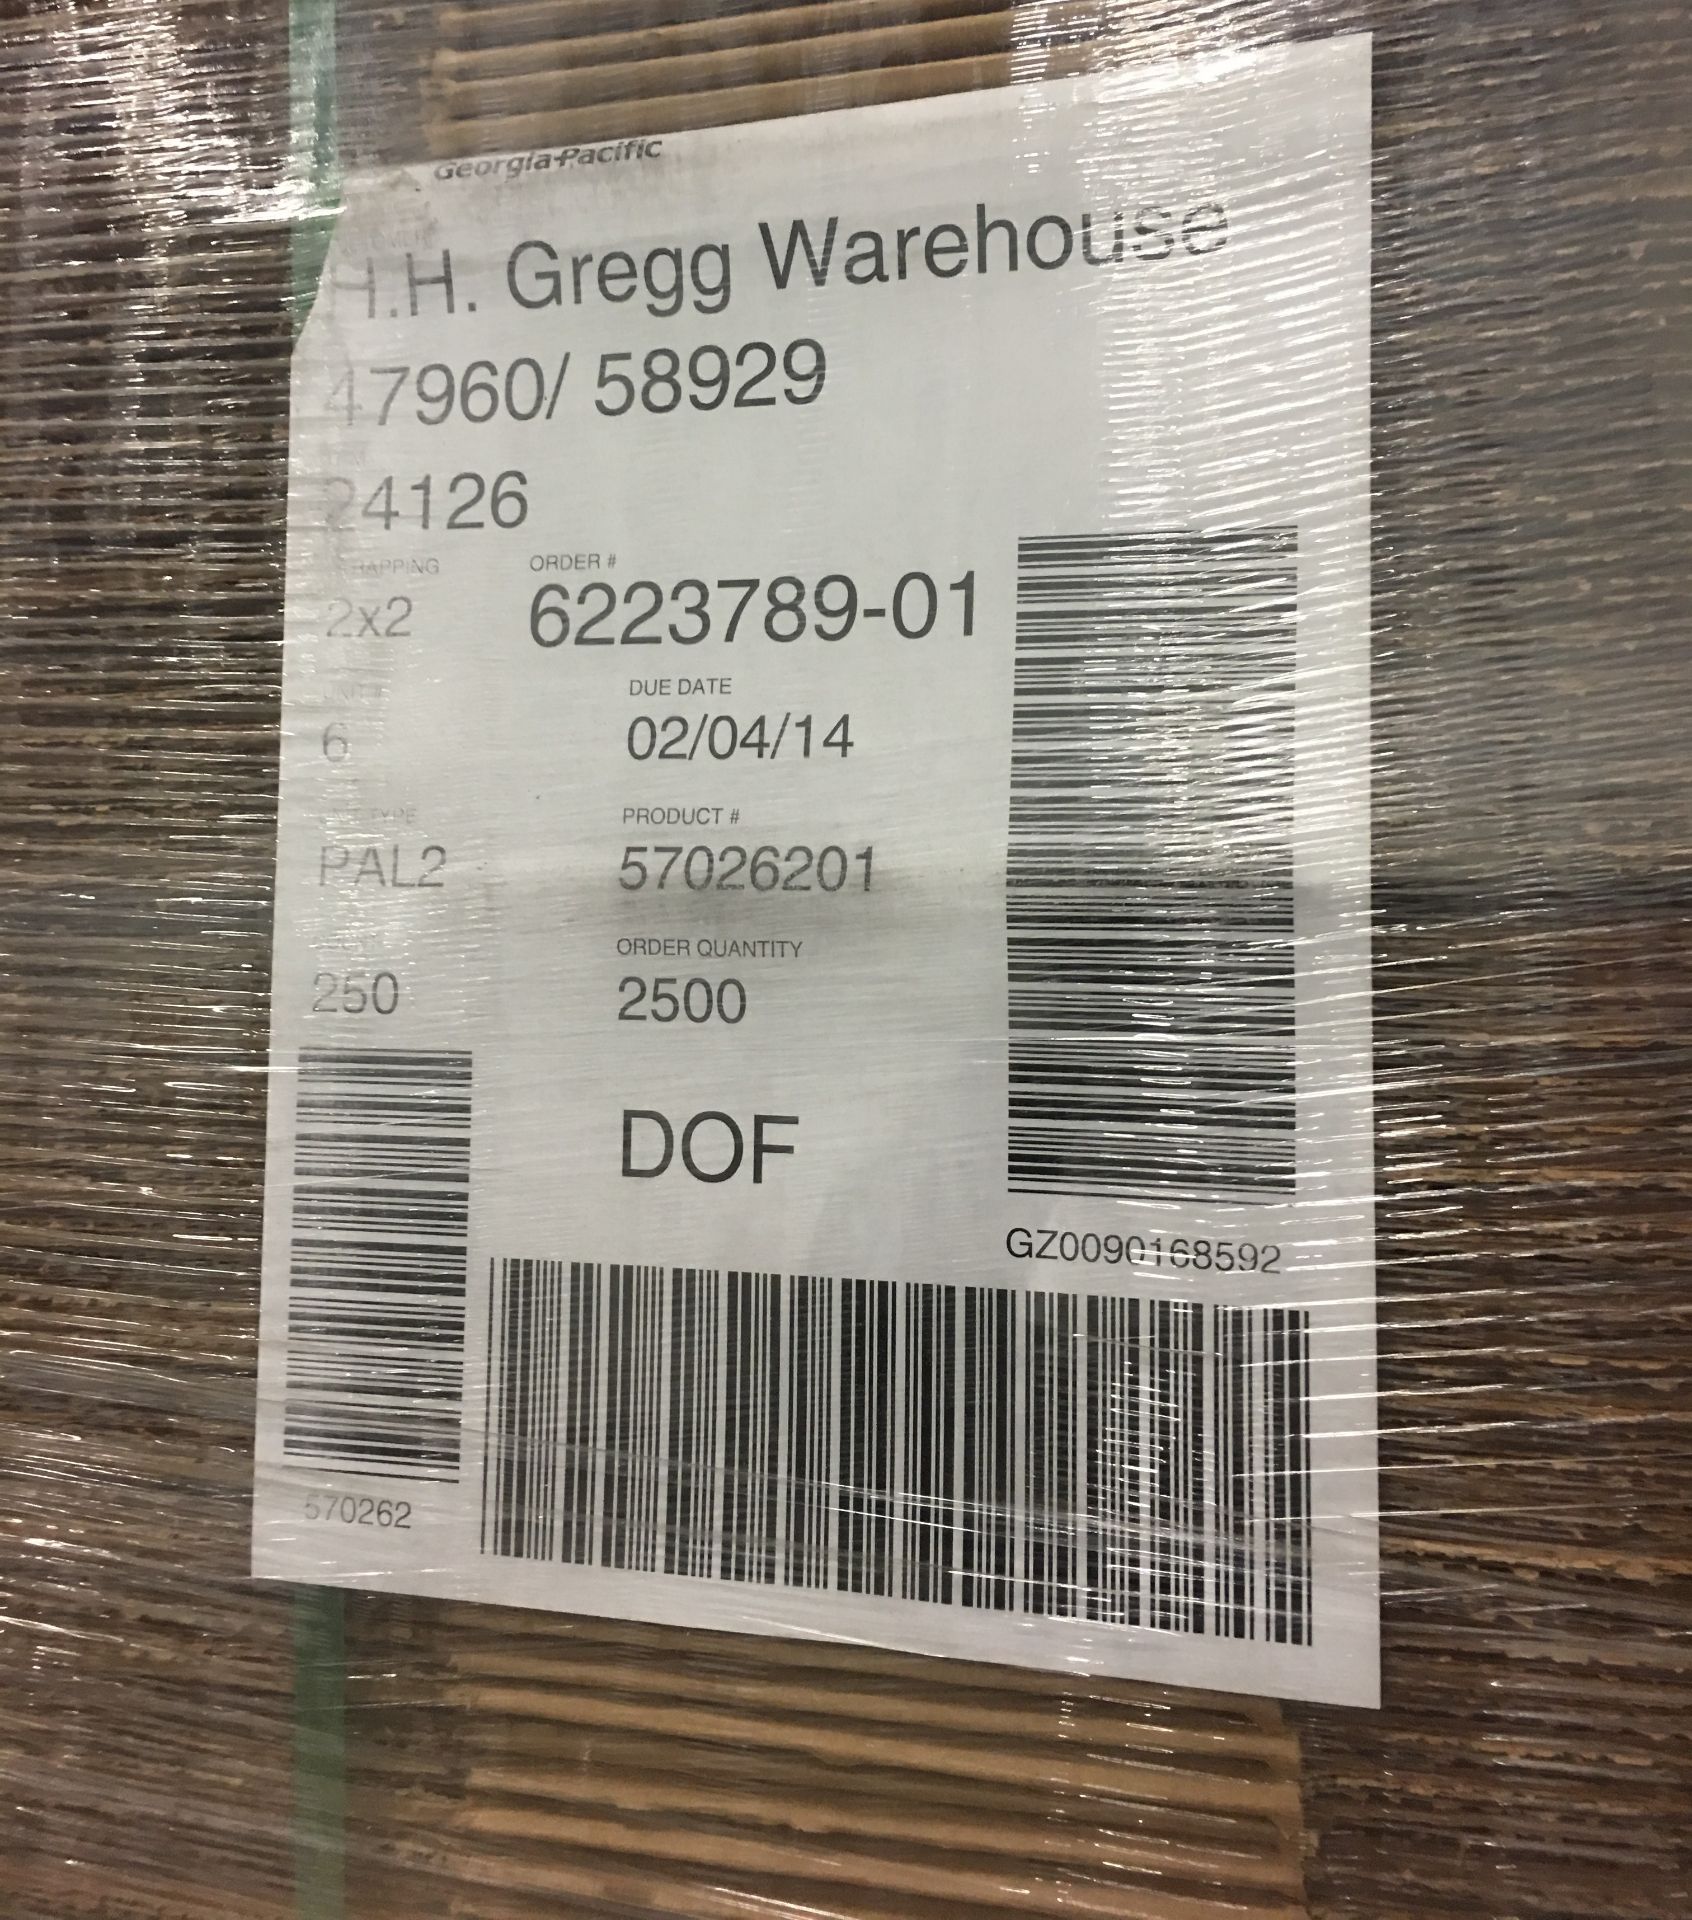 PALLET OF 24 X 12 X 06 INTERNATIONAL PAPER SHIPPING BOXES, - Image 2 of 2